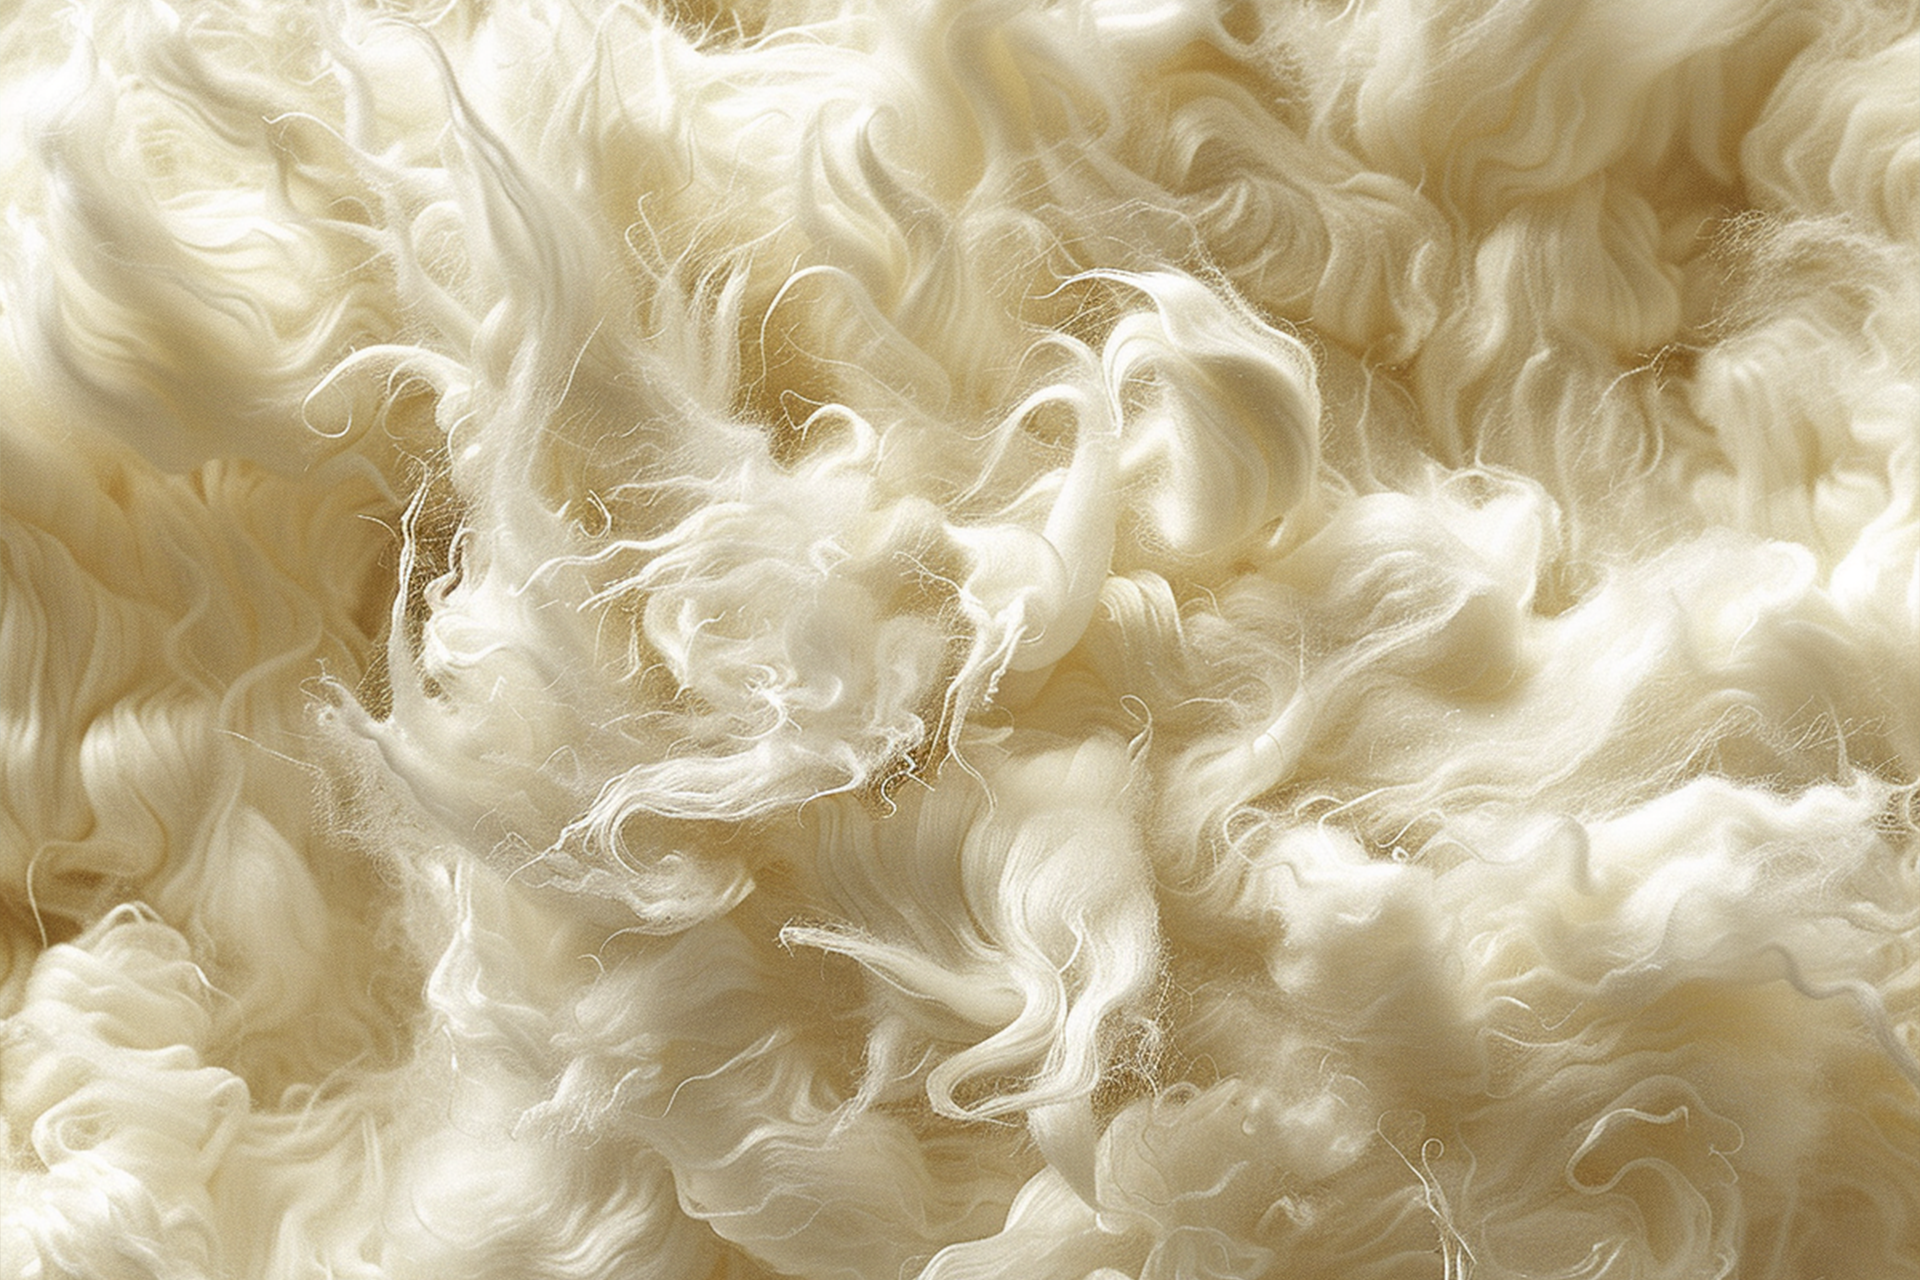 What is Merino wool and how is it made?